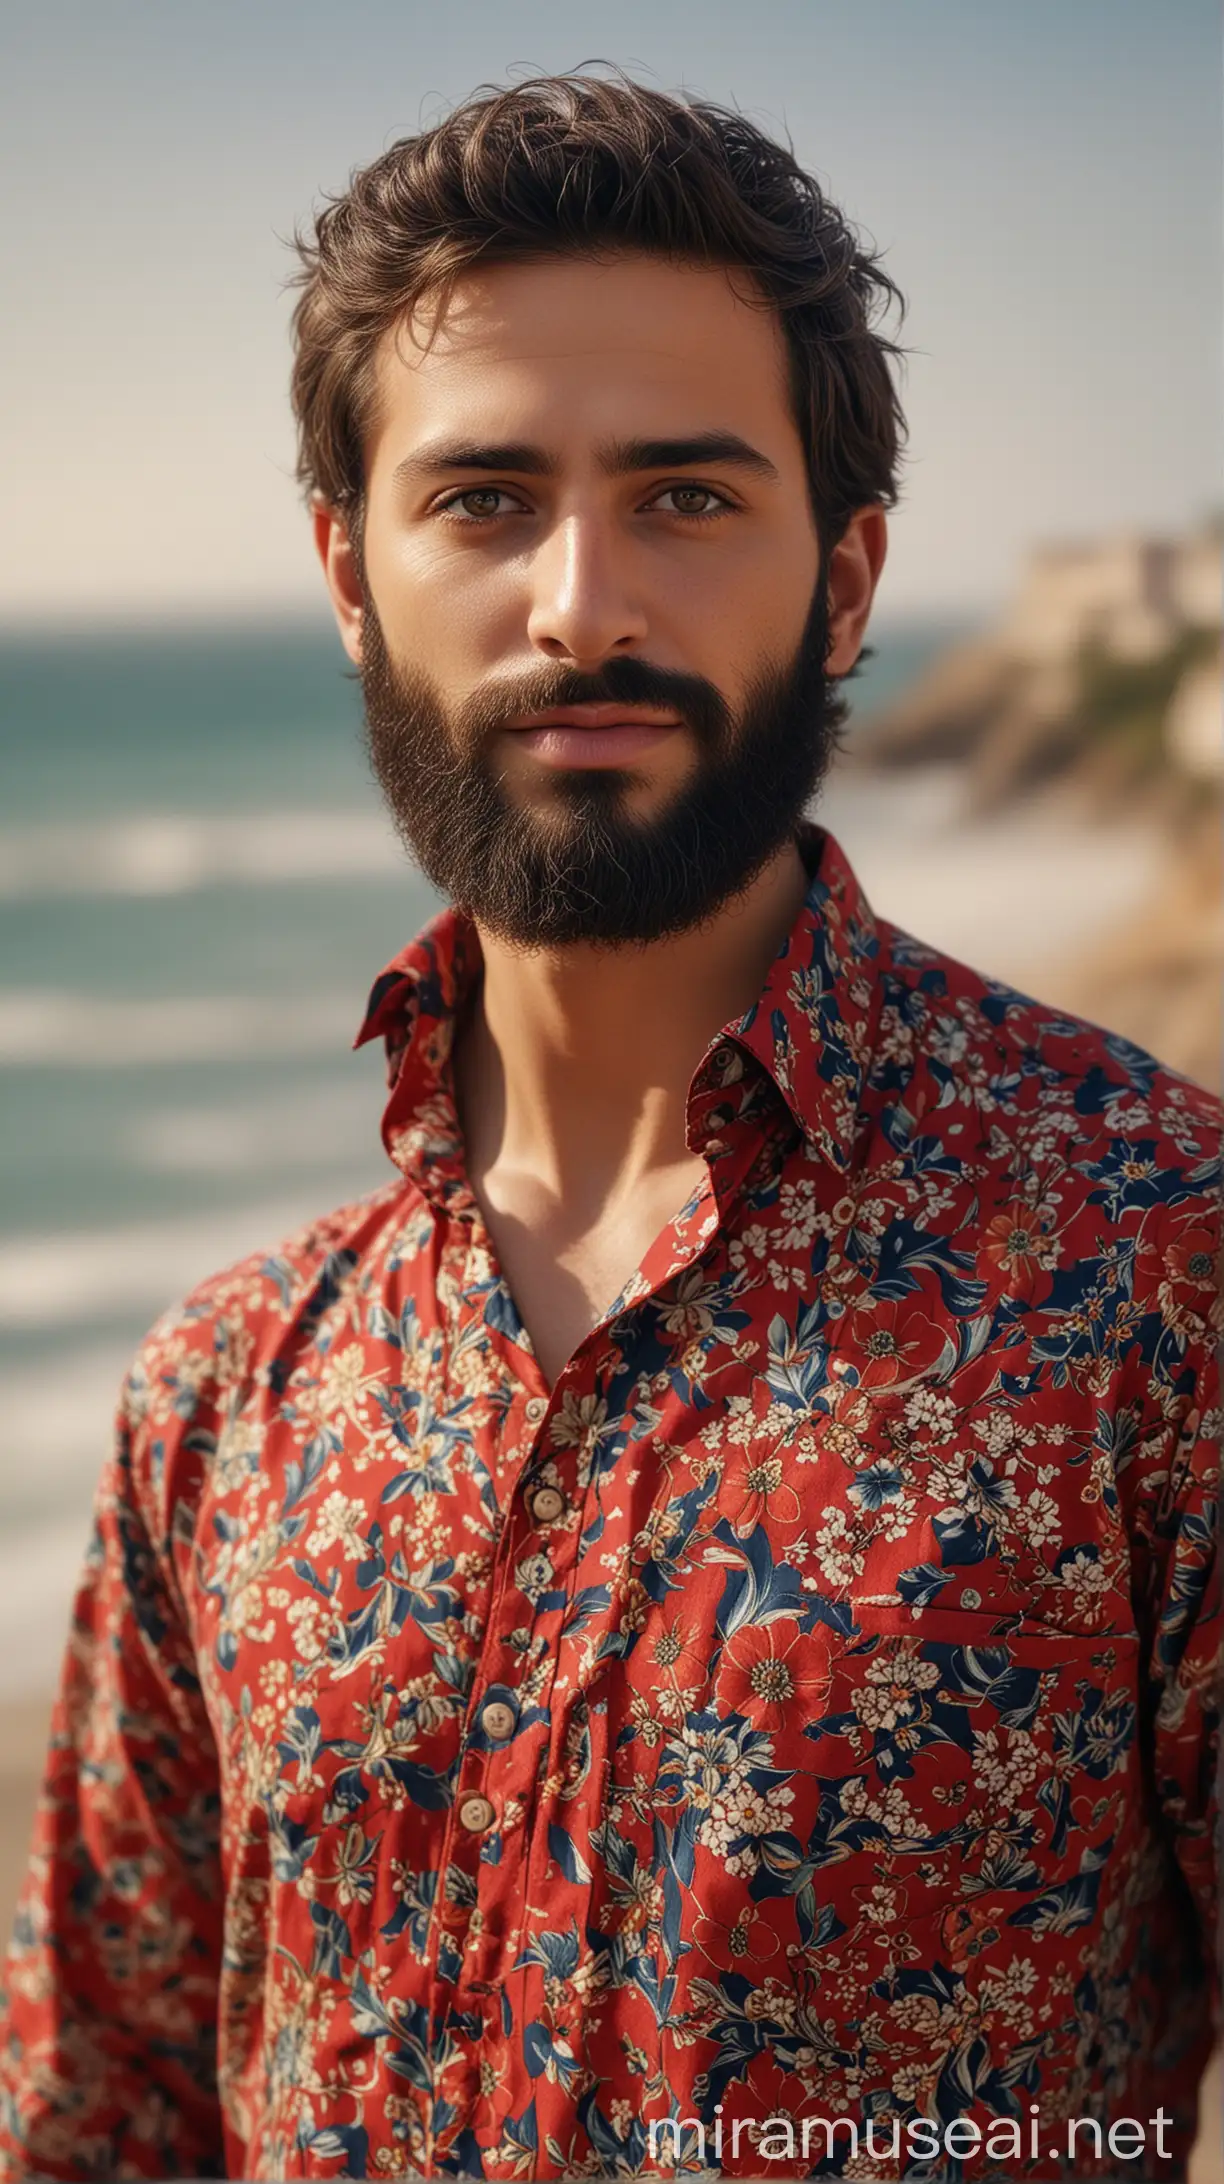 Graceful Arab Man in Red Floral Shirt and Navy Pants with Gold Trim Eyes of Beauty